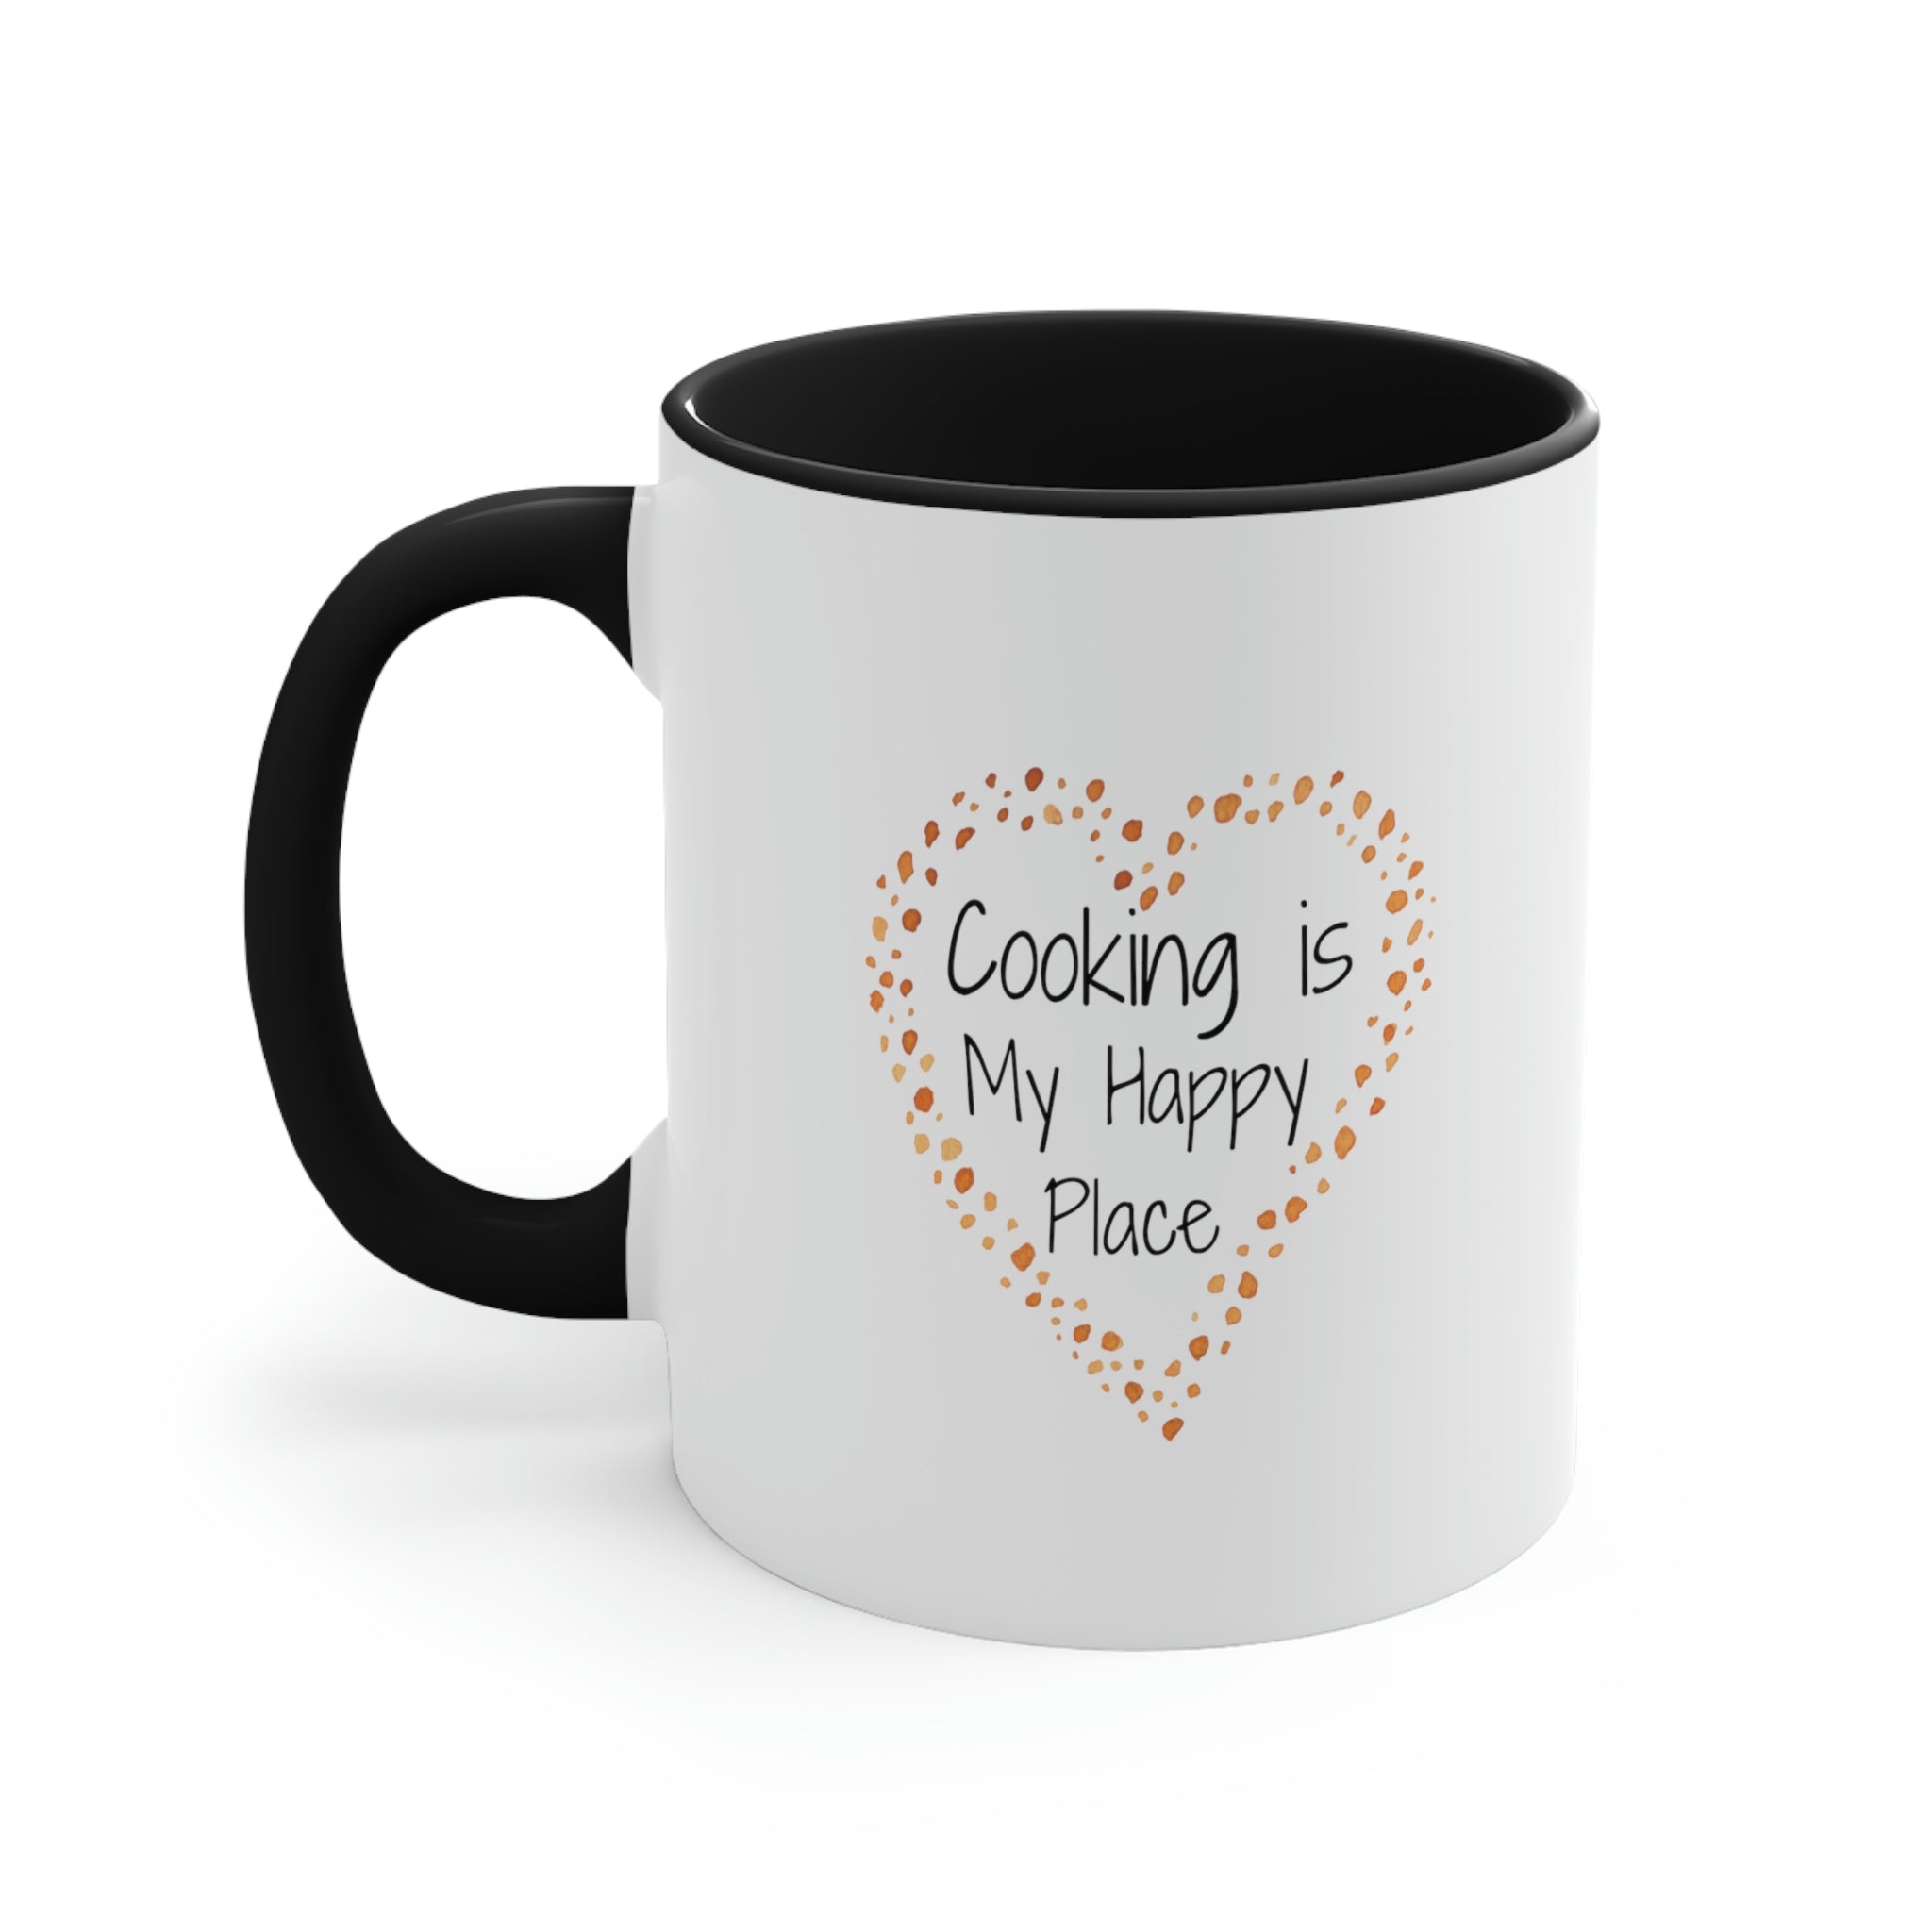 Coffee Mug, Cooking is My Happy Place 11oz Ceramic Mug with Light-Hearted Design, Dishwasher and Microwave Safe, Perfect Gift for Hot Beverage Lovers - cooking mug 8